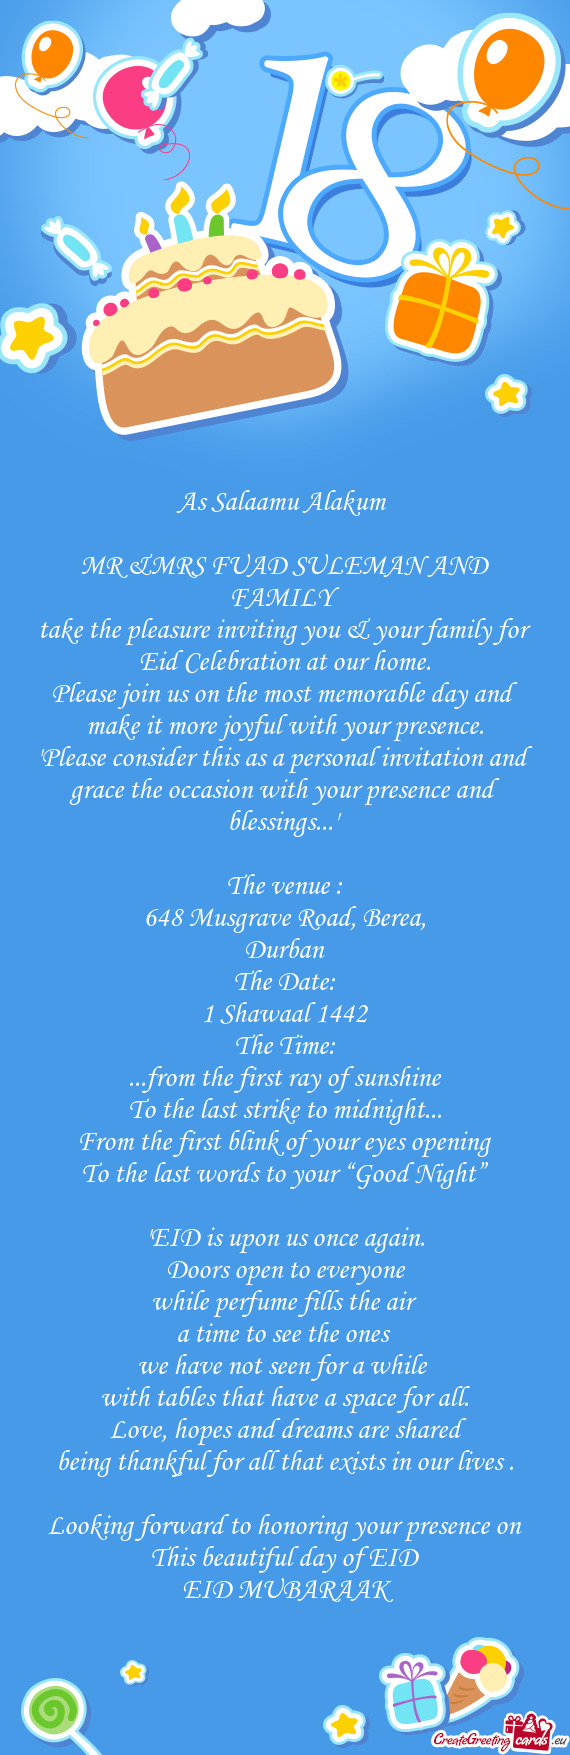 "Please consider this as a personal invitation and grace the occasion with your presence and blessin